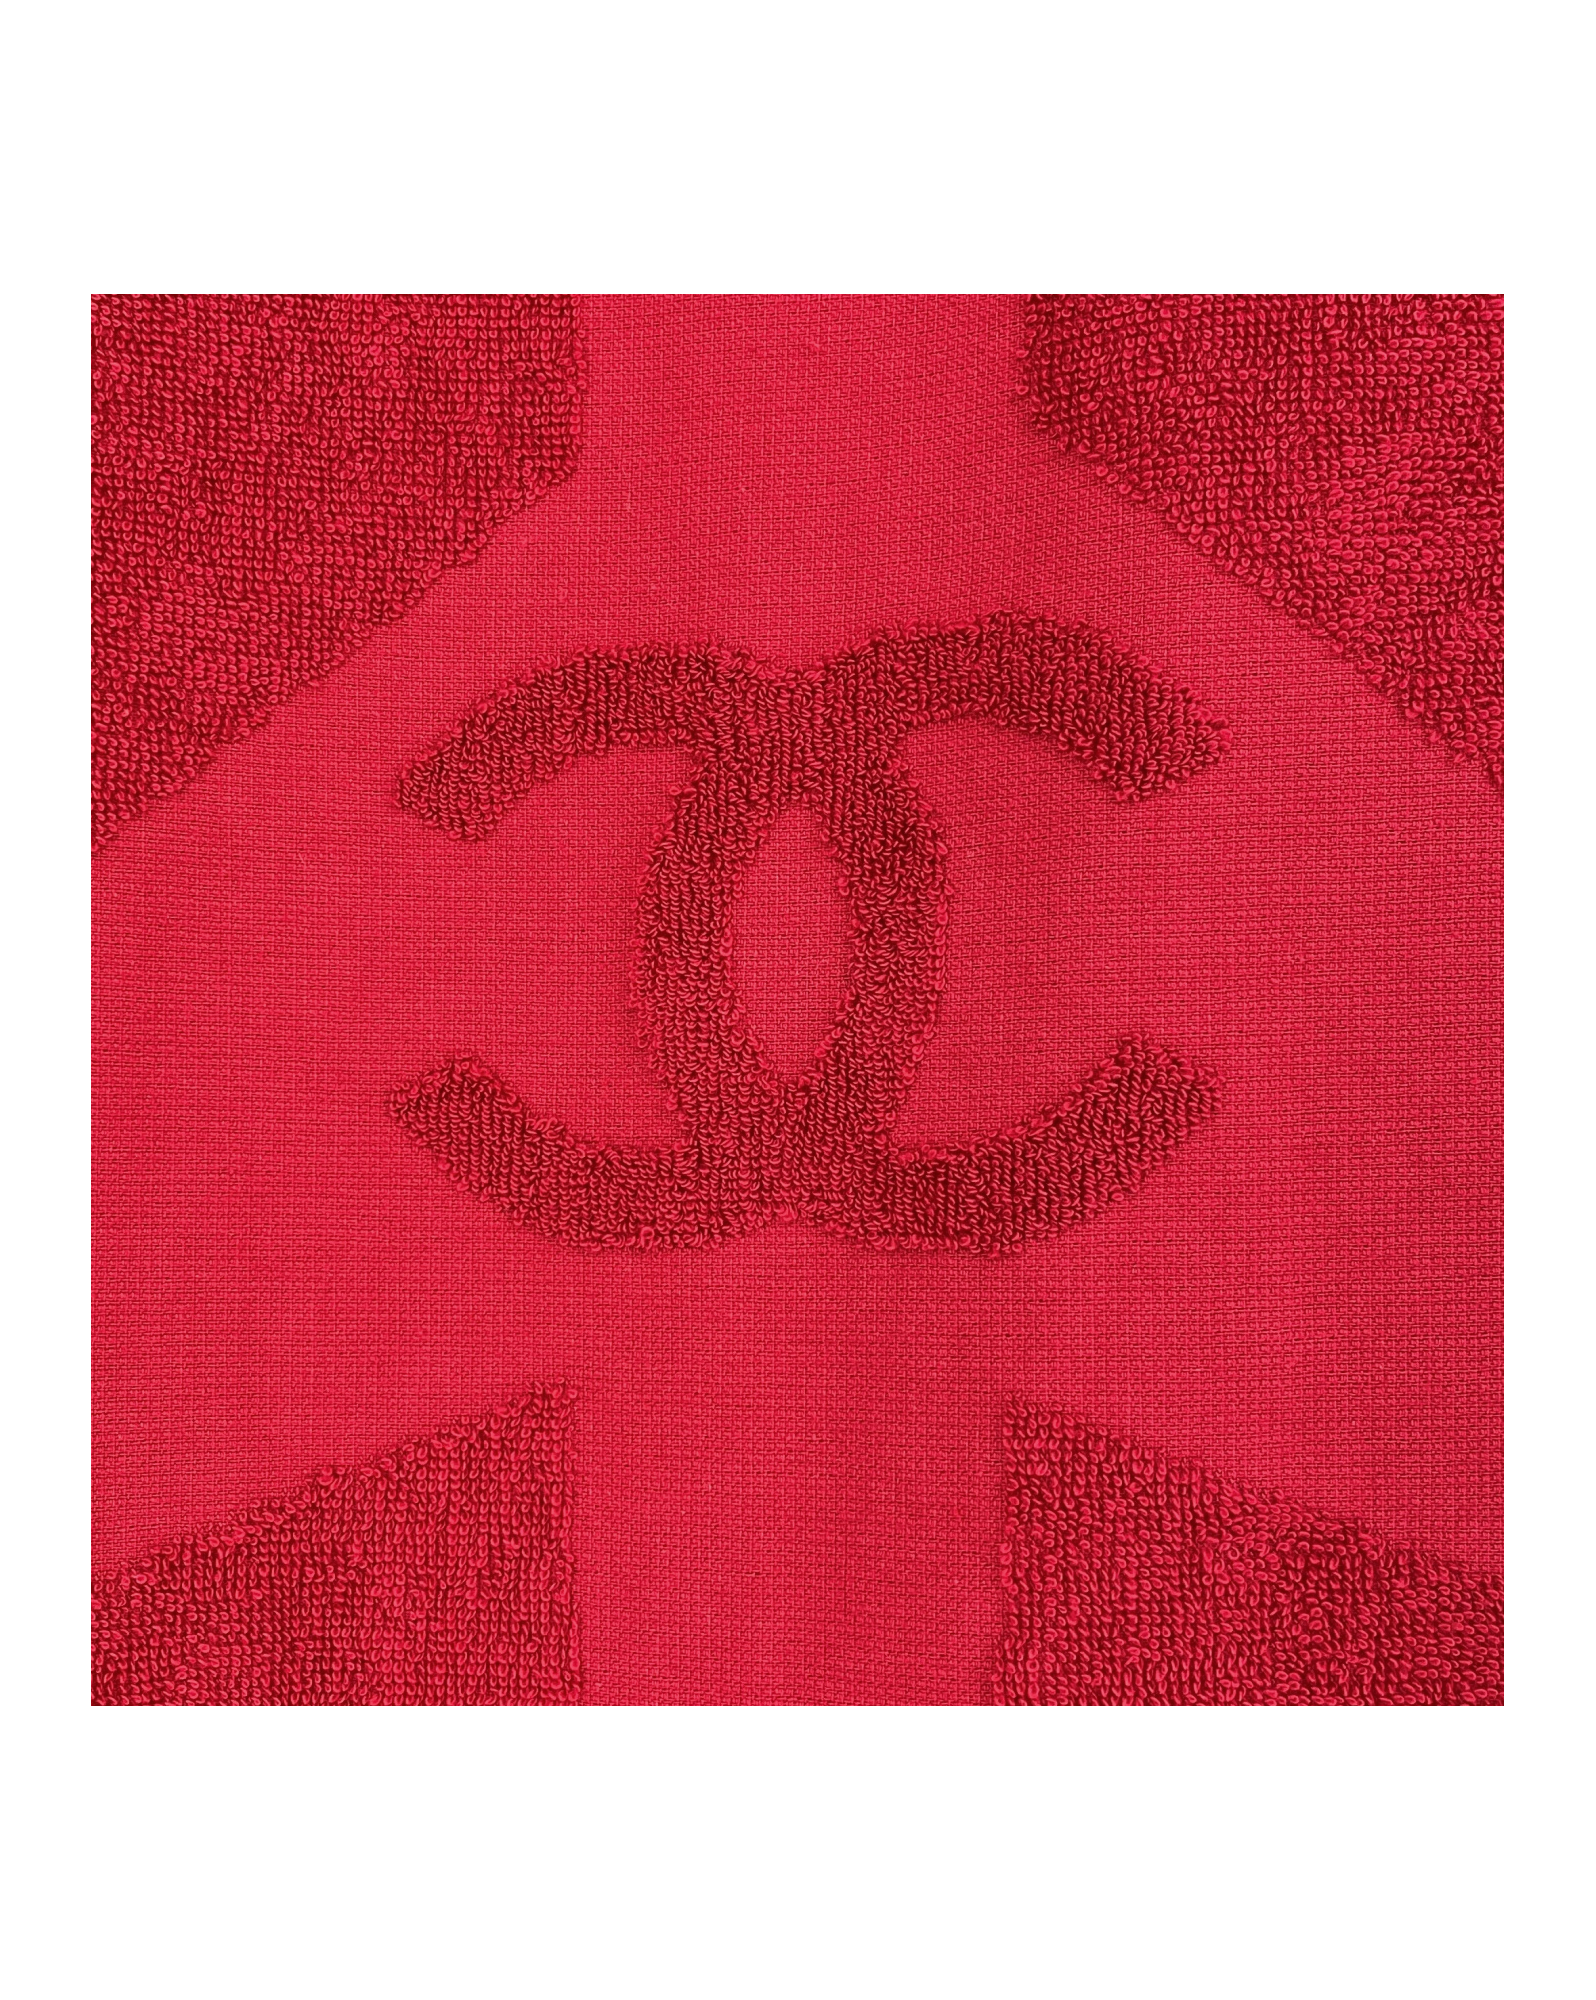 Chanel Airline SS16 Beach Towel